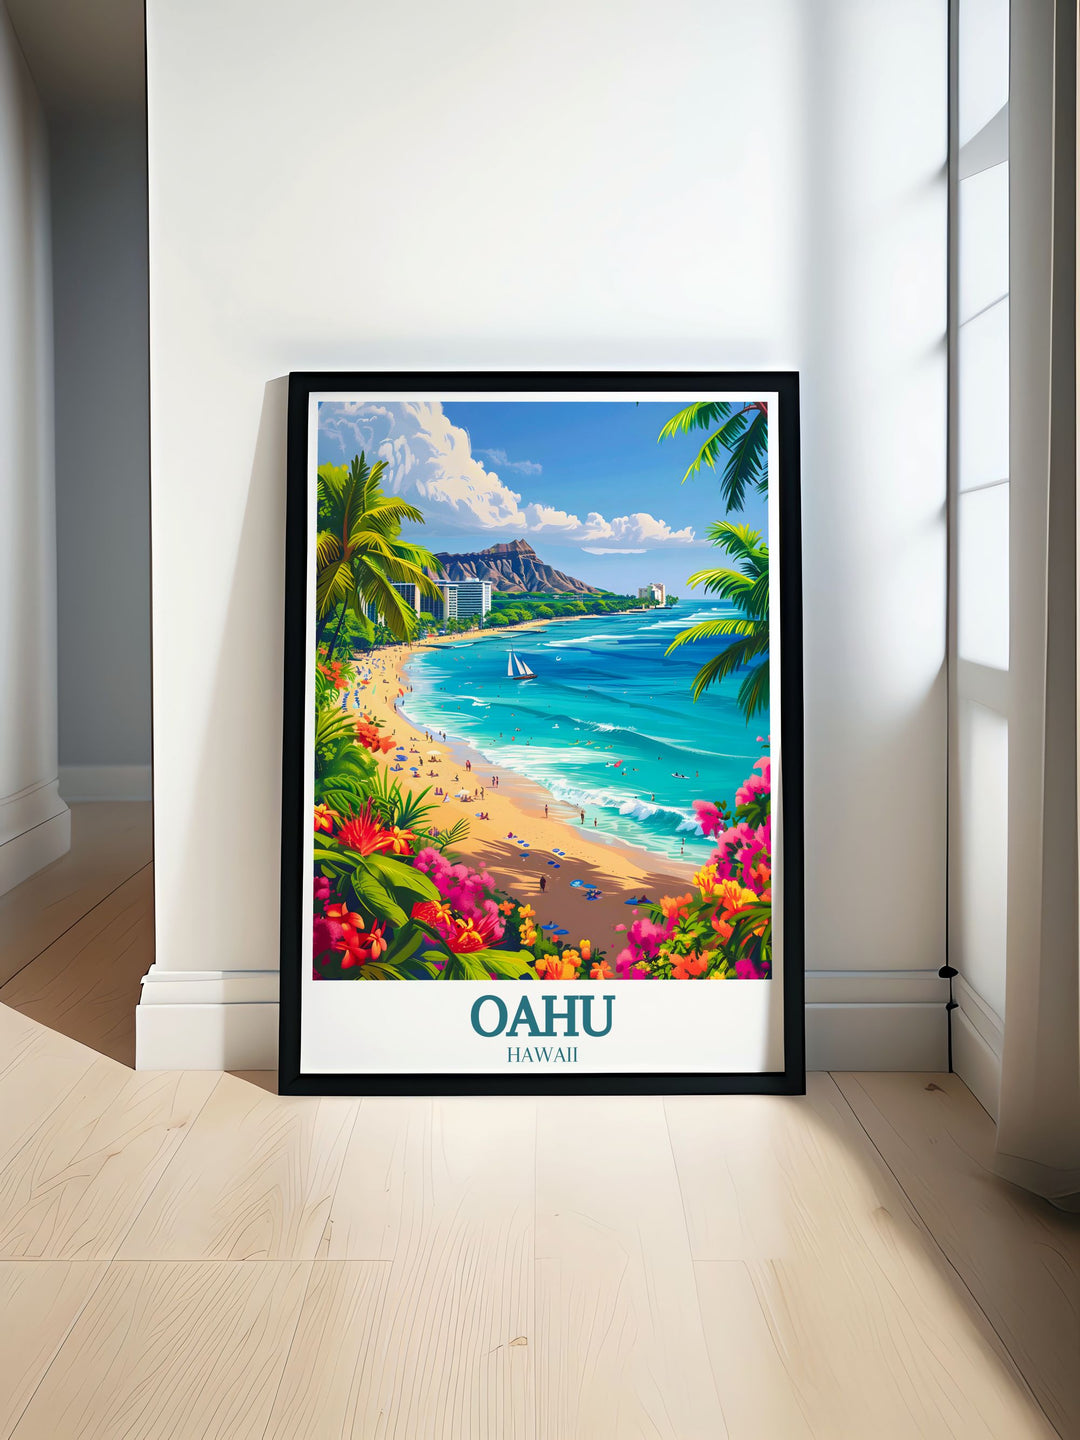 This Oahu print beautifully captures Waikiki Beach and Diamond Head Crater perfect for adding a touch of Hawaiian paradise to your home decor and an ideal gift for any occasion.